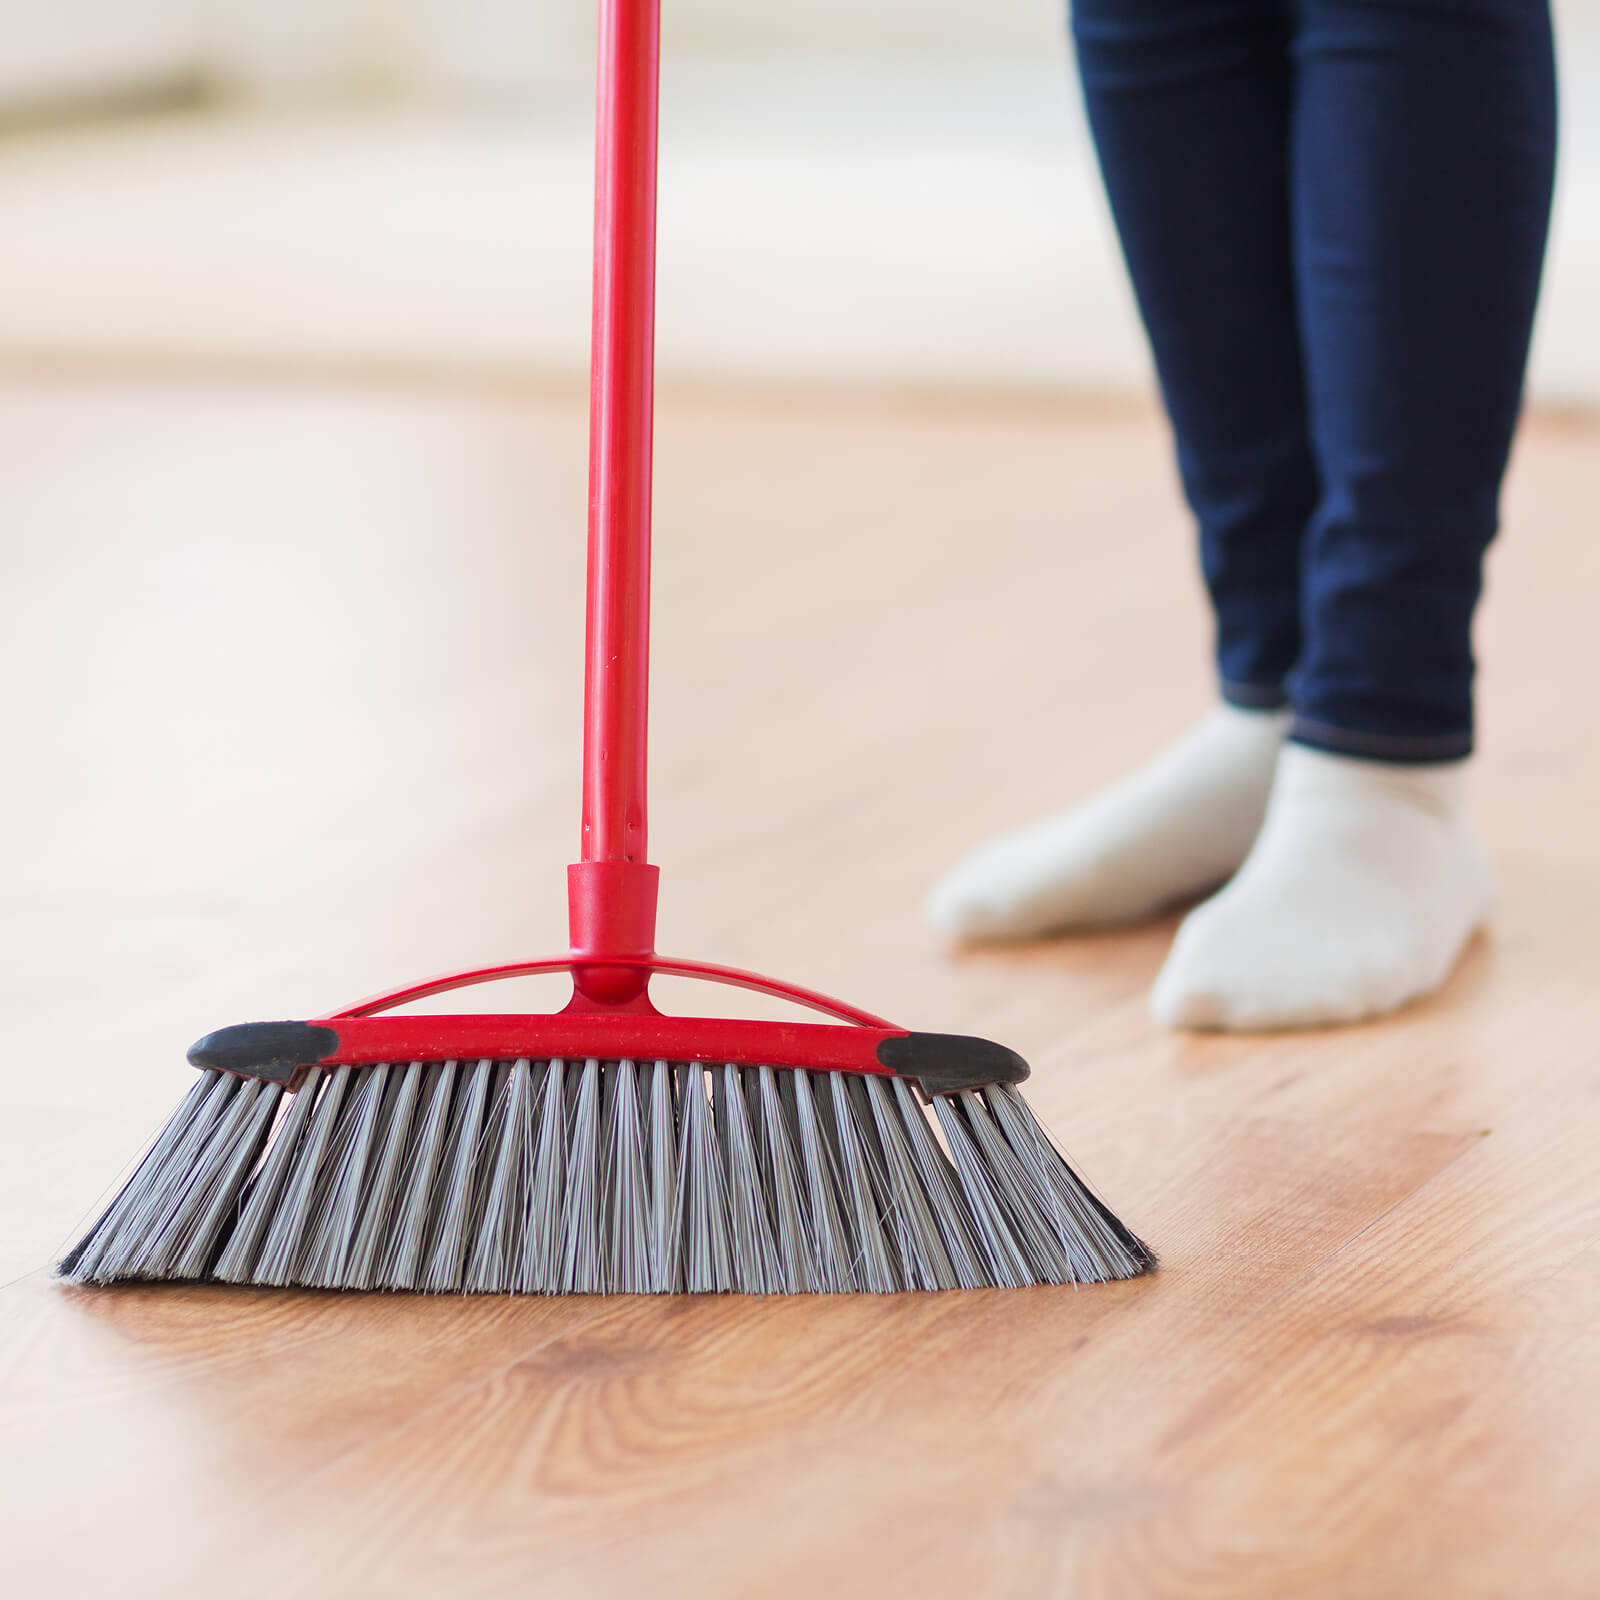 Laminate cleaning | Blair Mill Outlet